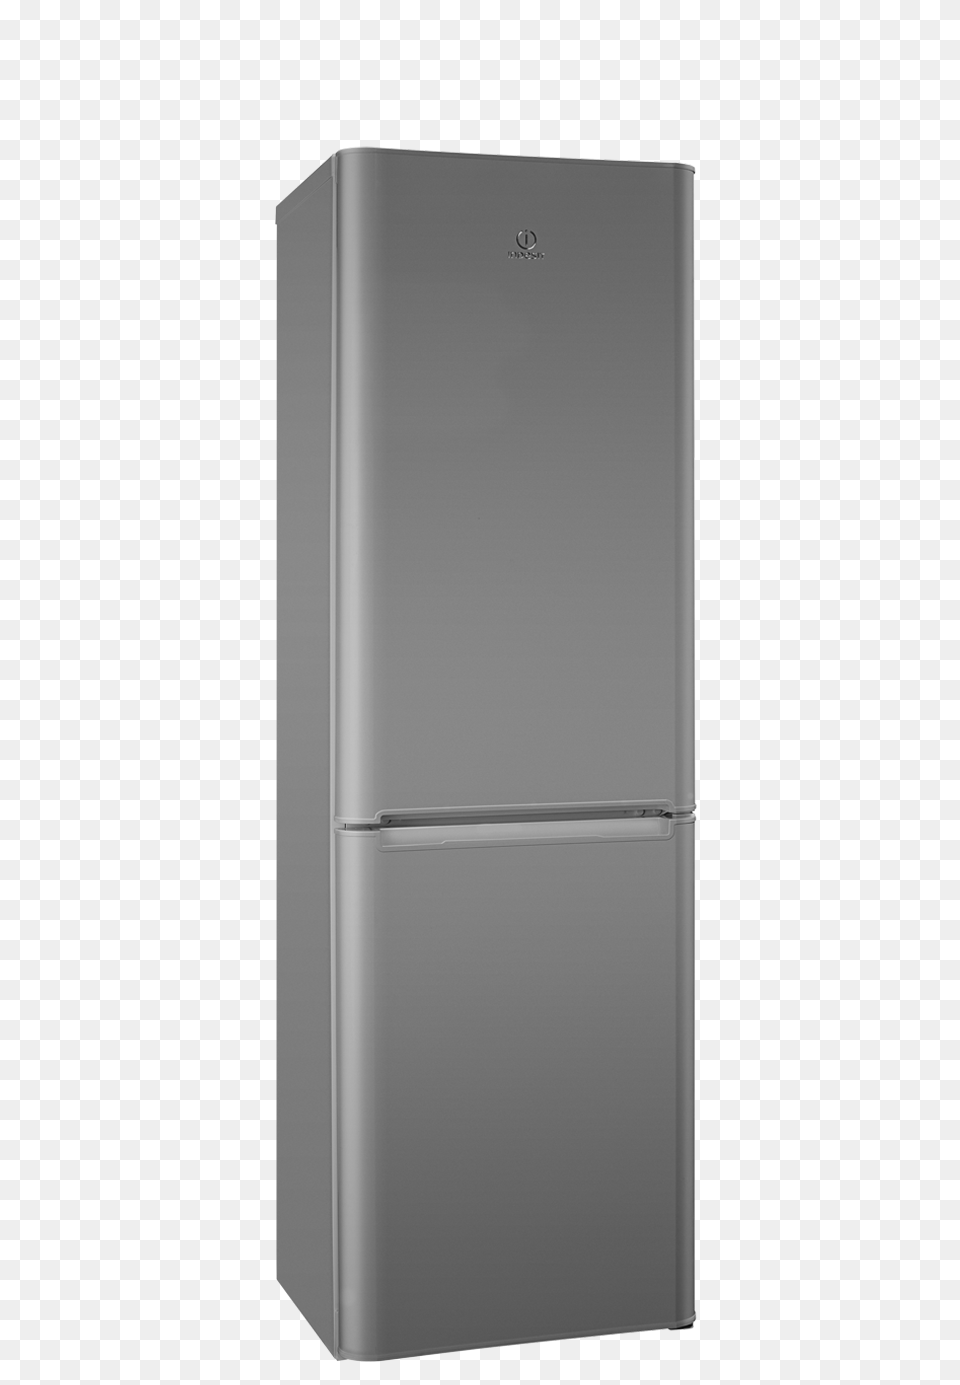 Pngpr Z, Appliance, Device, Electrical Device, Refrigerator Png